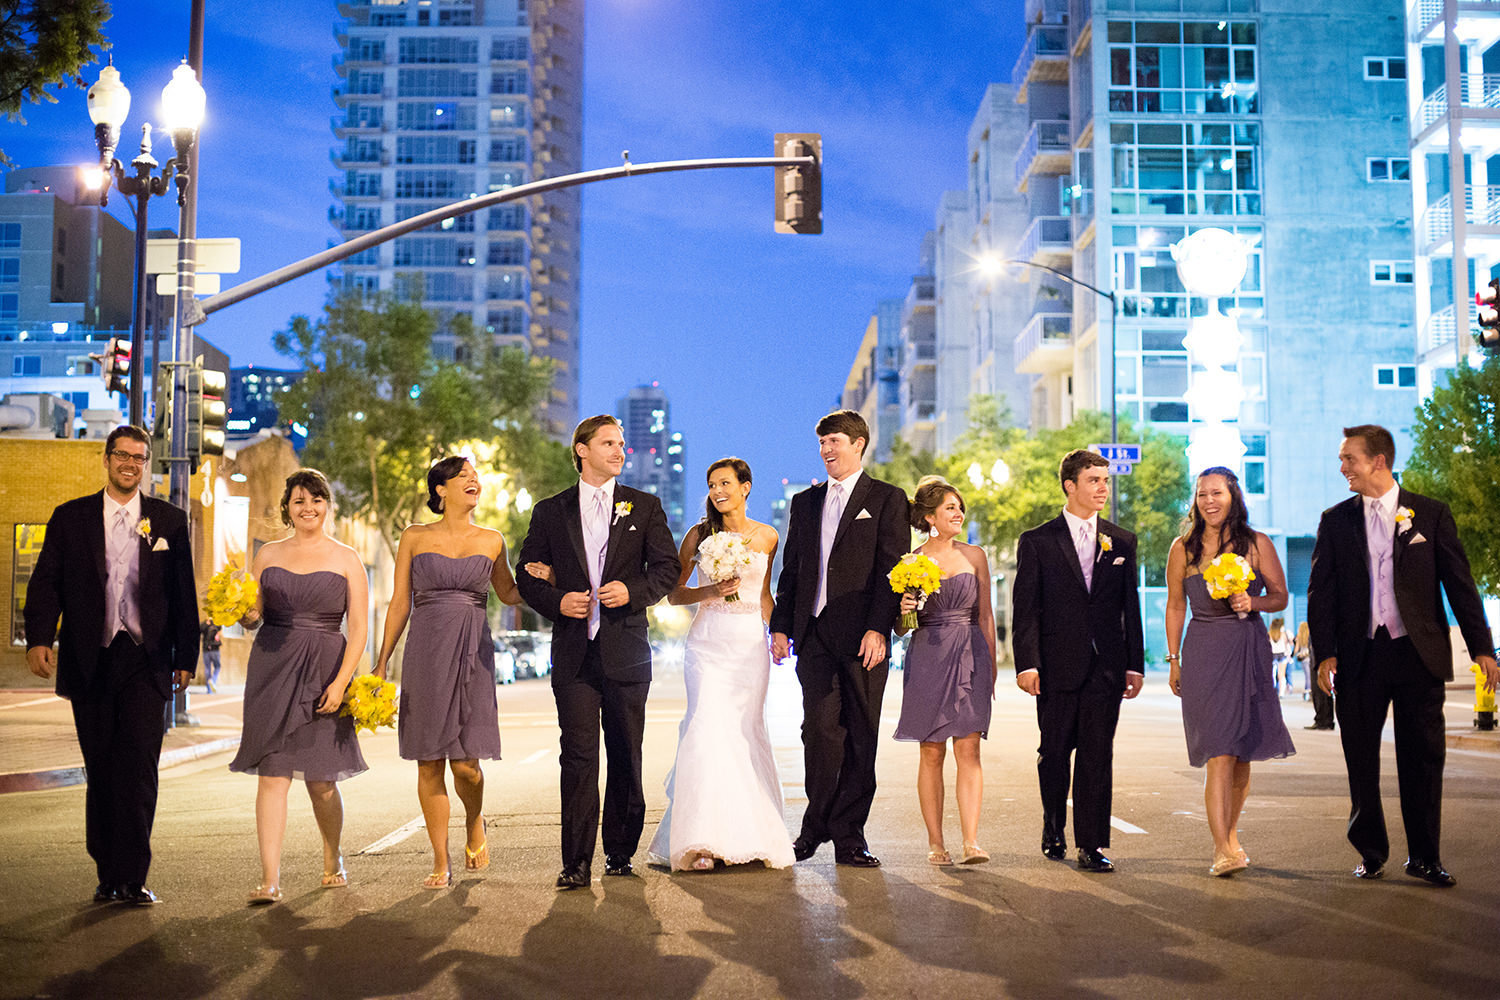 Creative wedding party portrait downtown at night